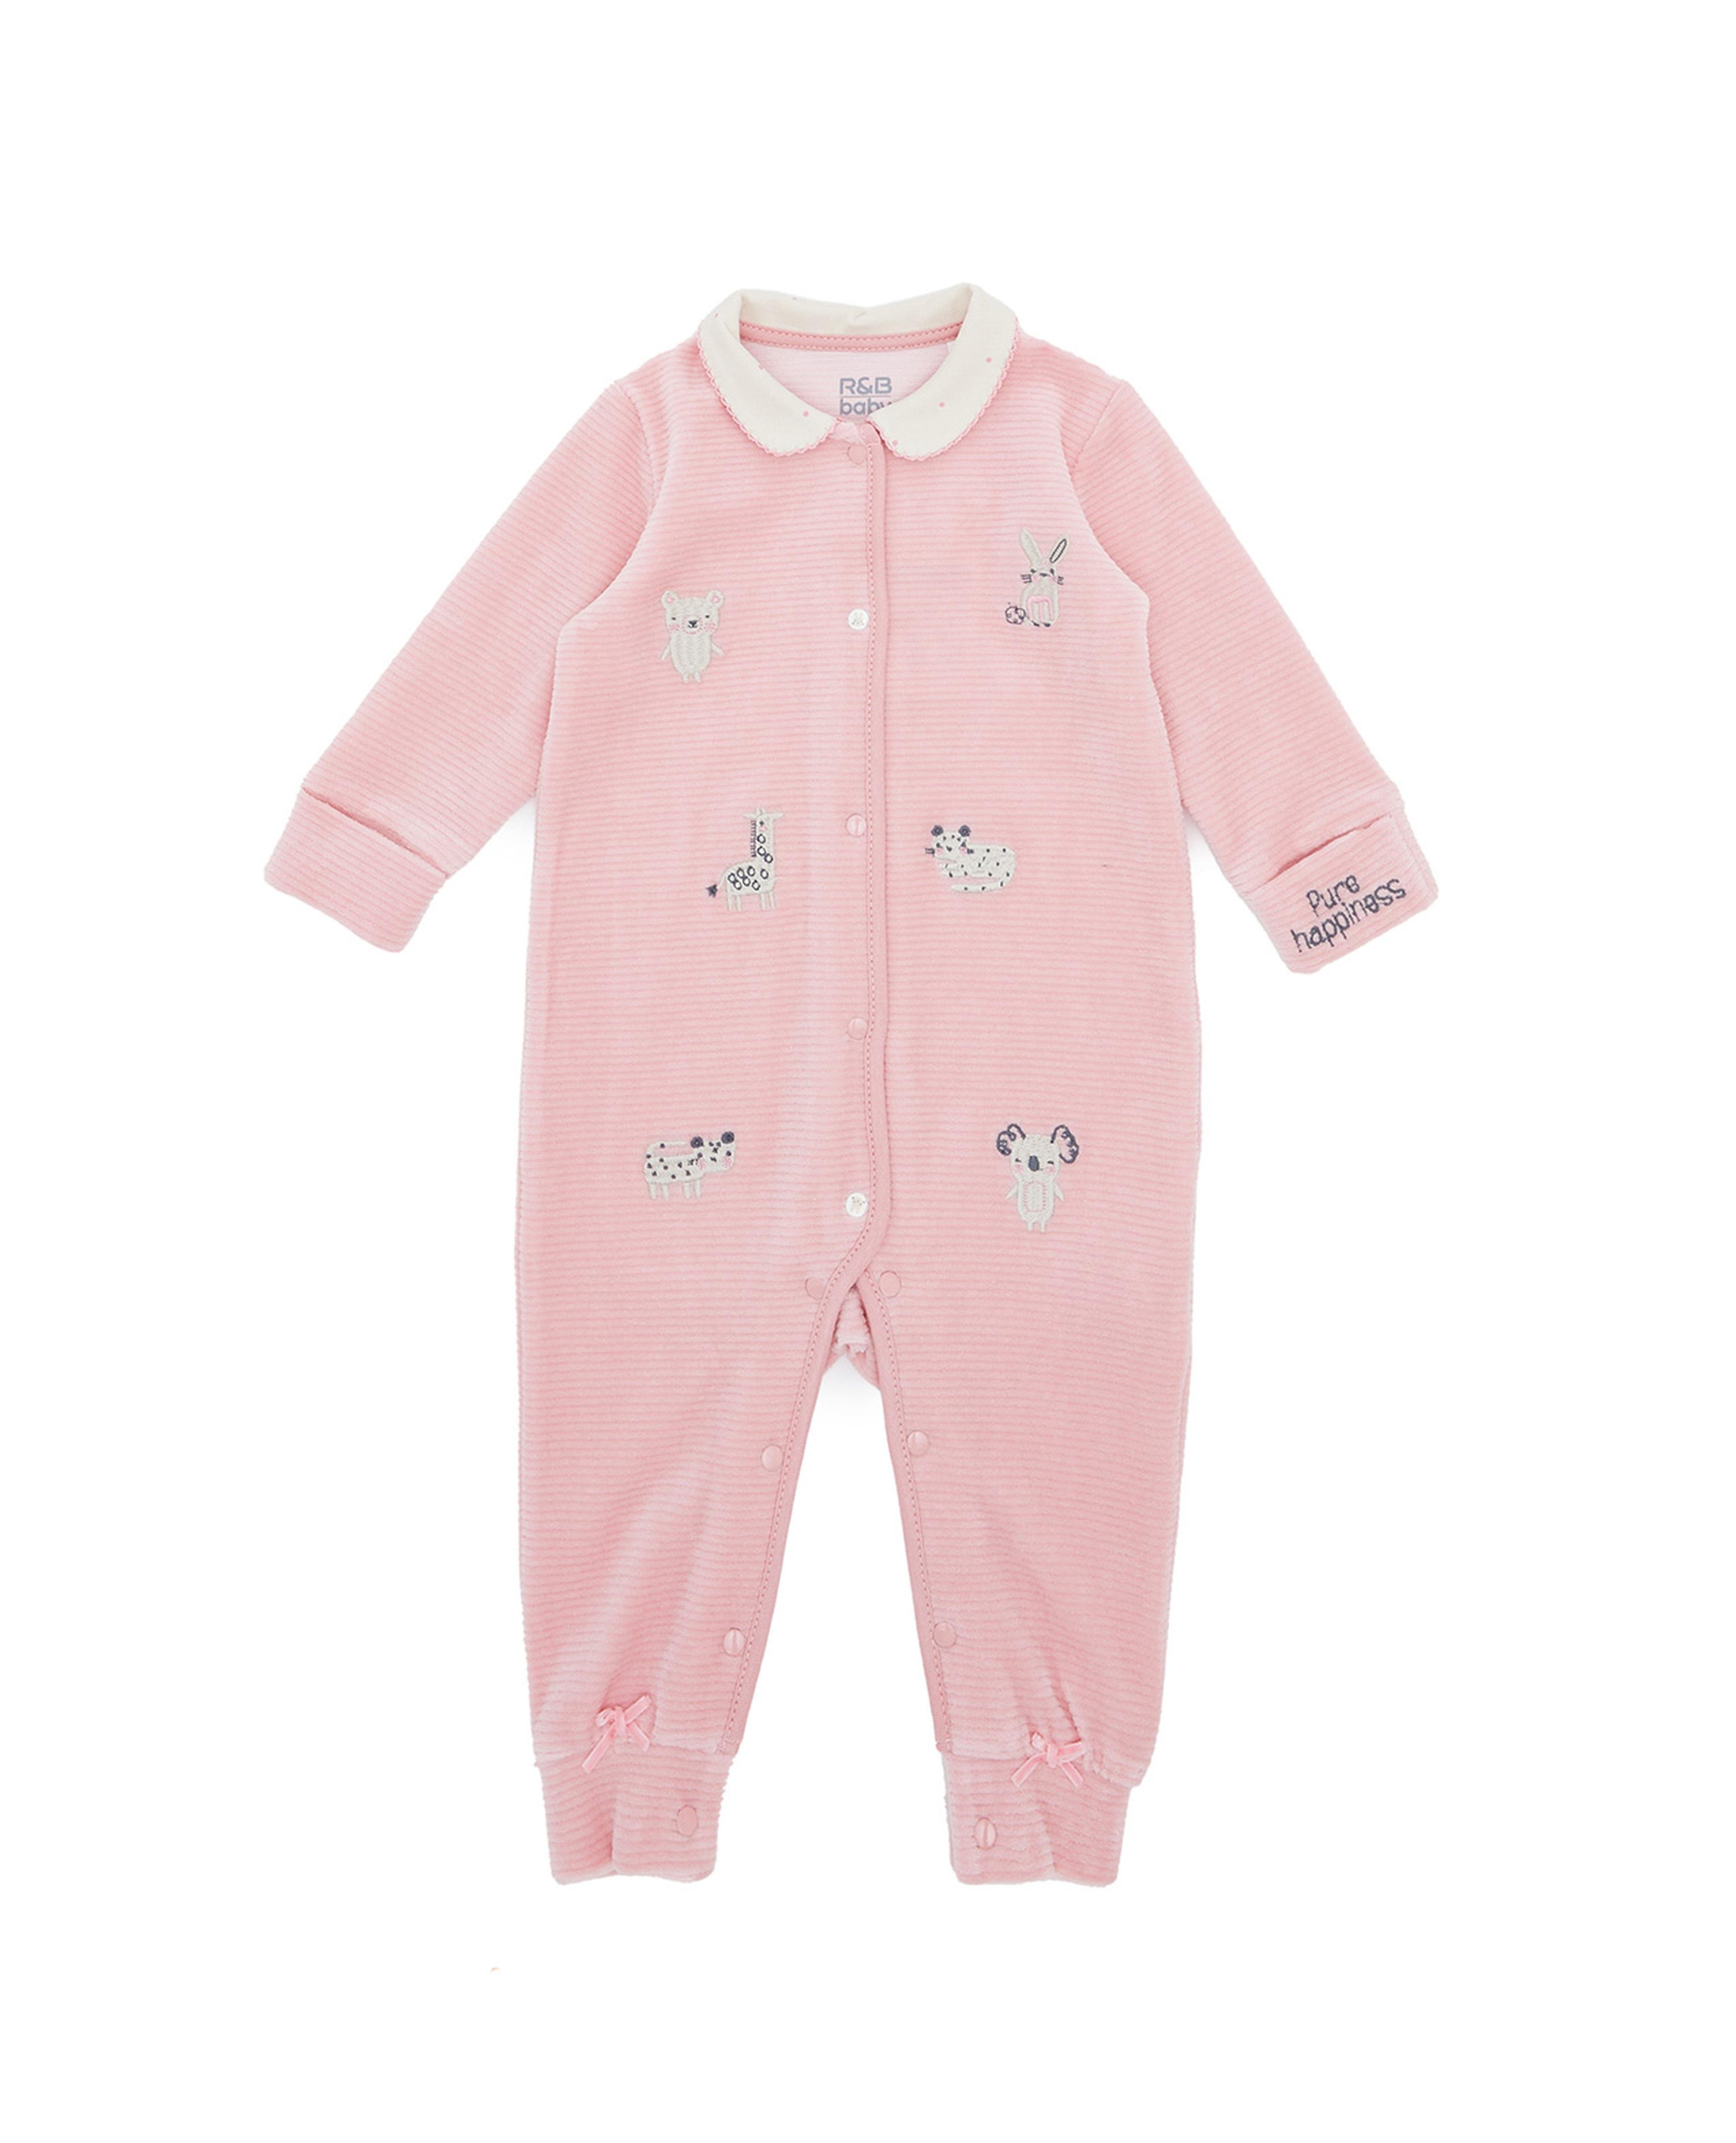 Embroidered Collared Sleepsuit